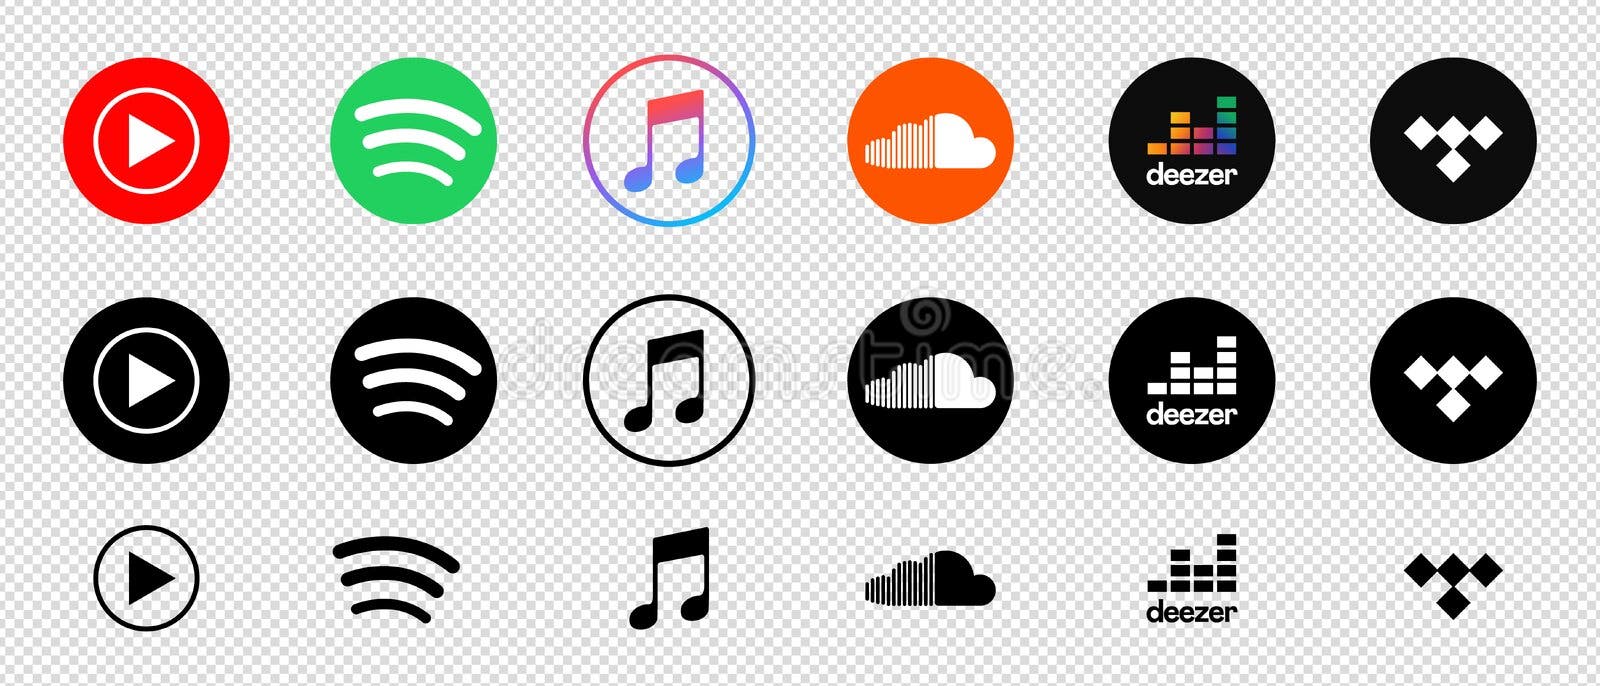 Music stream icon line cloud. Isolated symbol online education